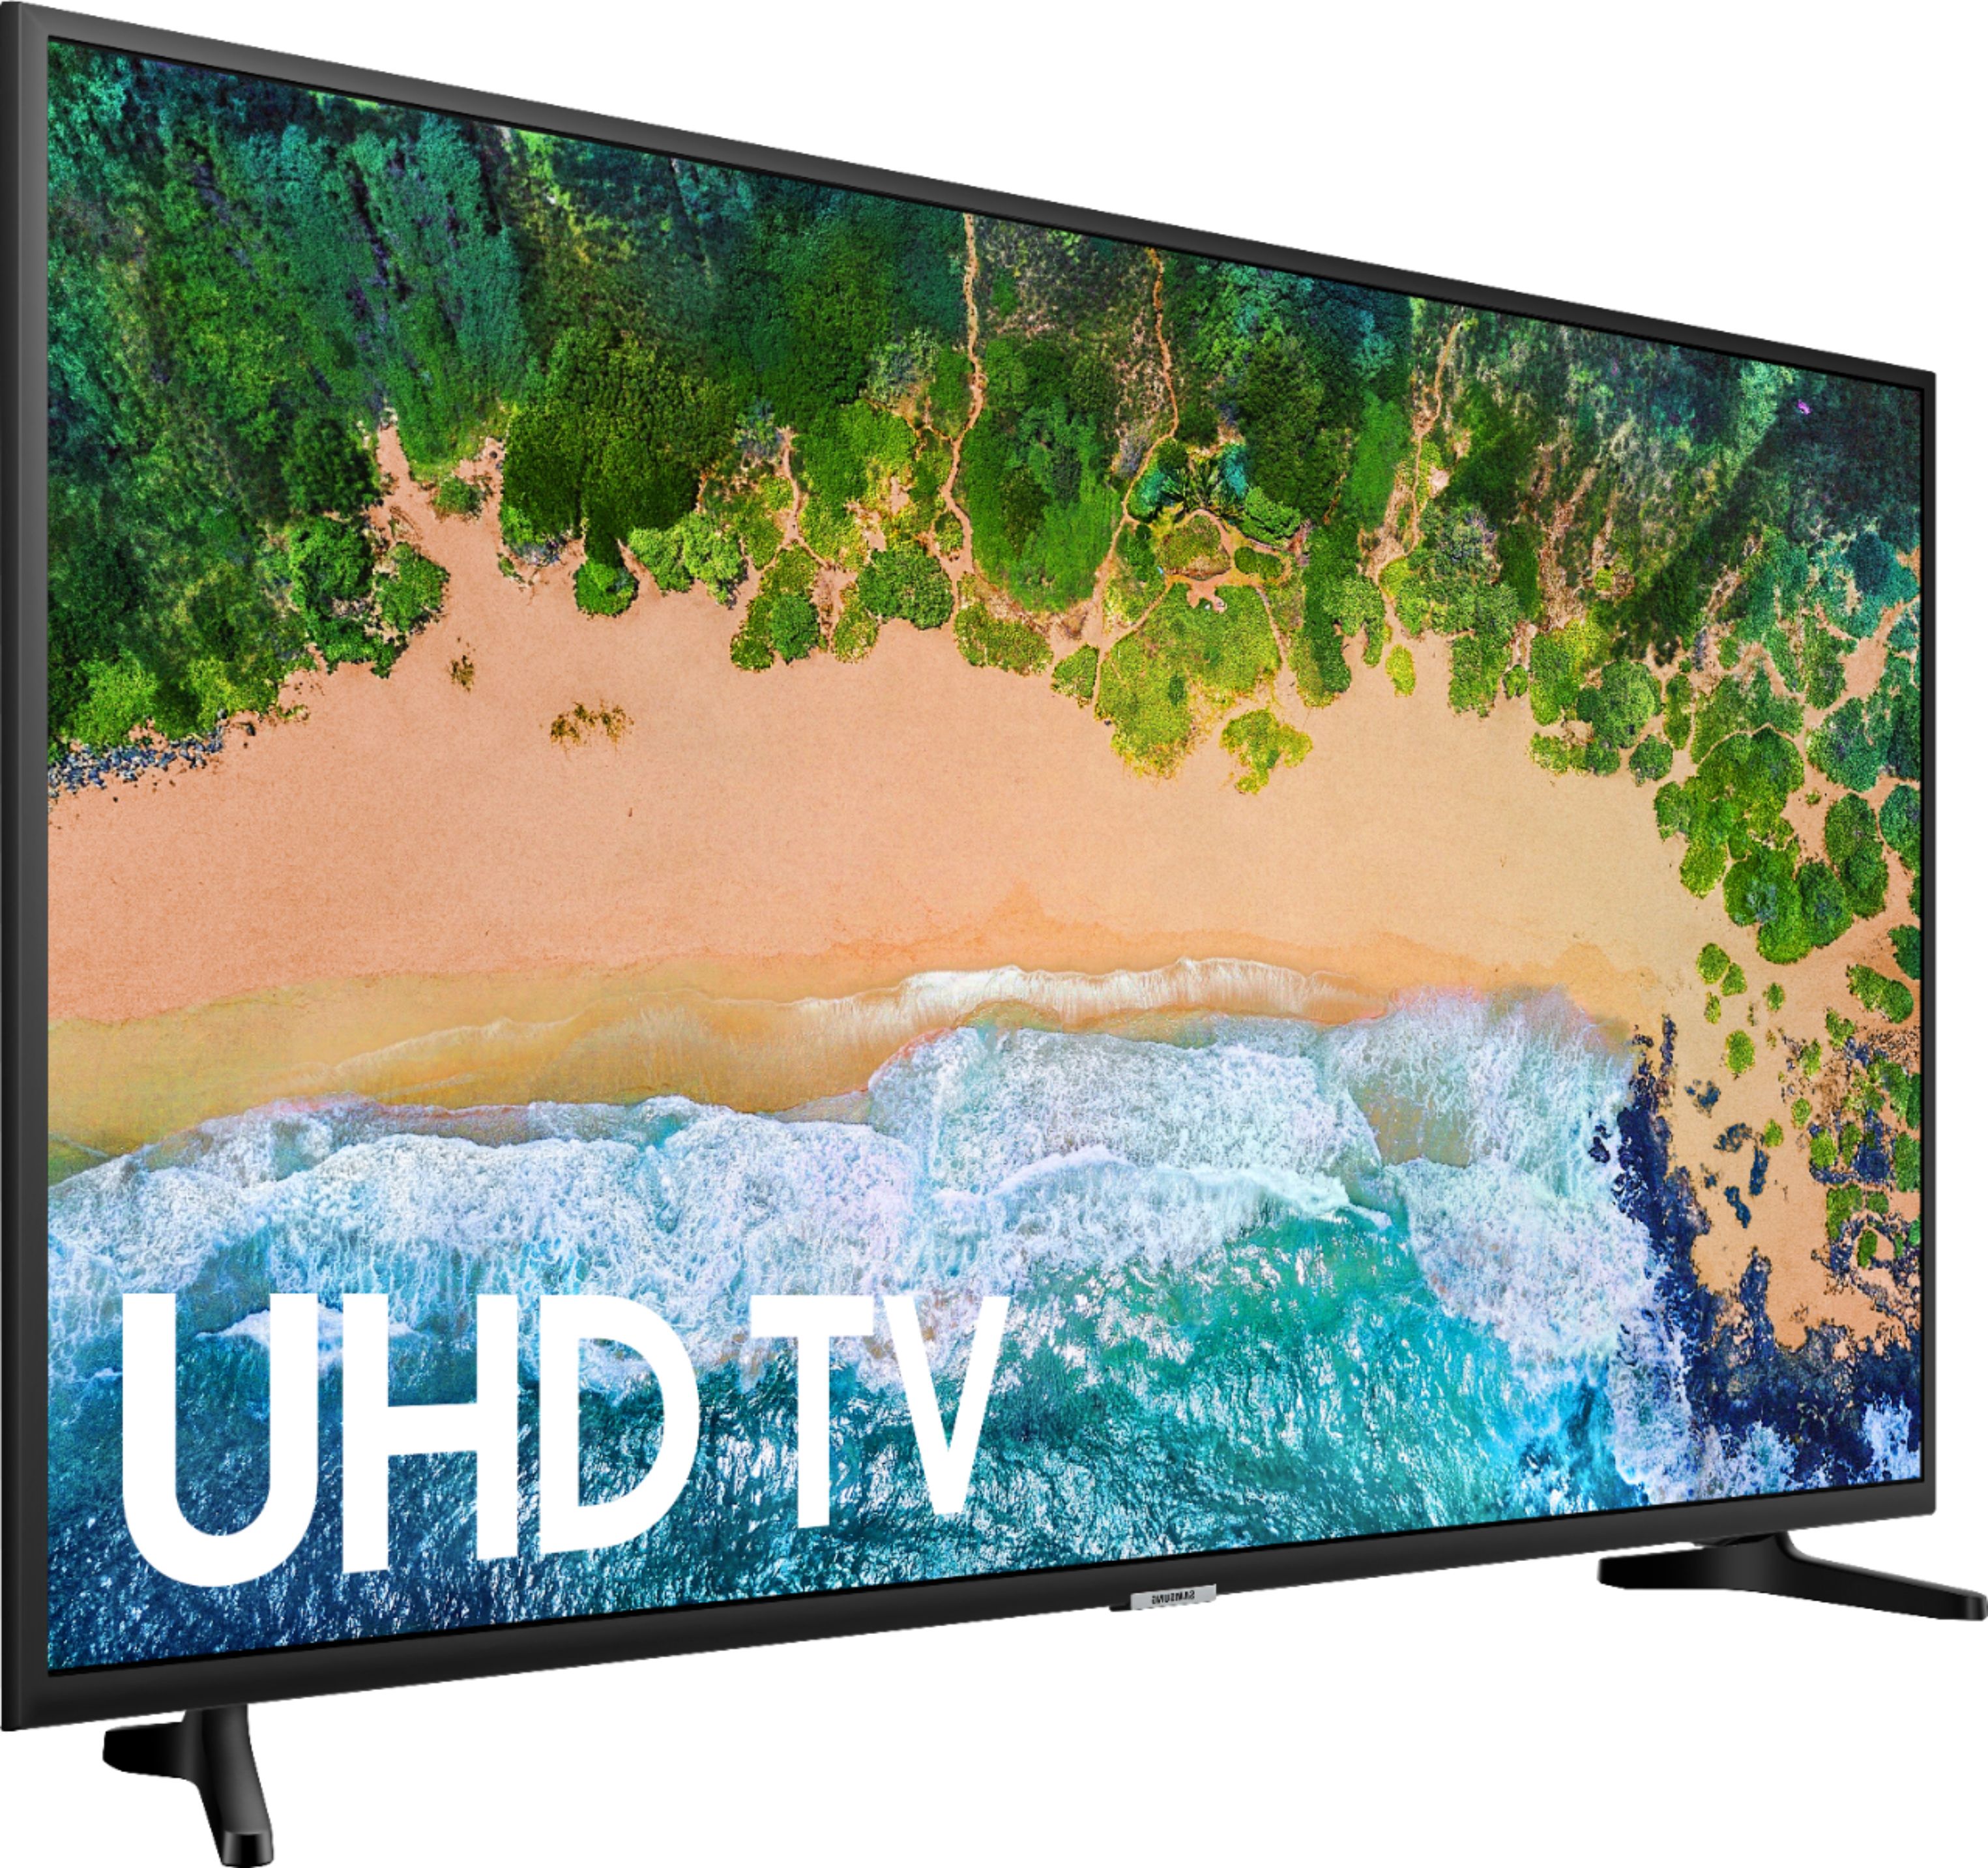 Best Buy Samsung 40 Class Led 6 Series 2160p Smart 4k Uhd Tv With Hdr